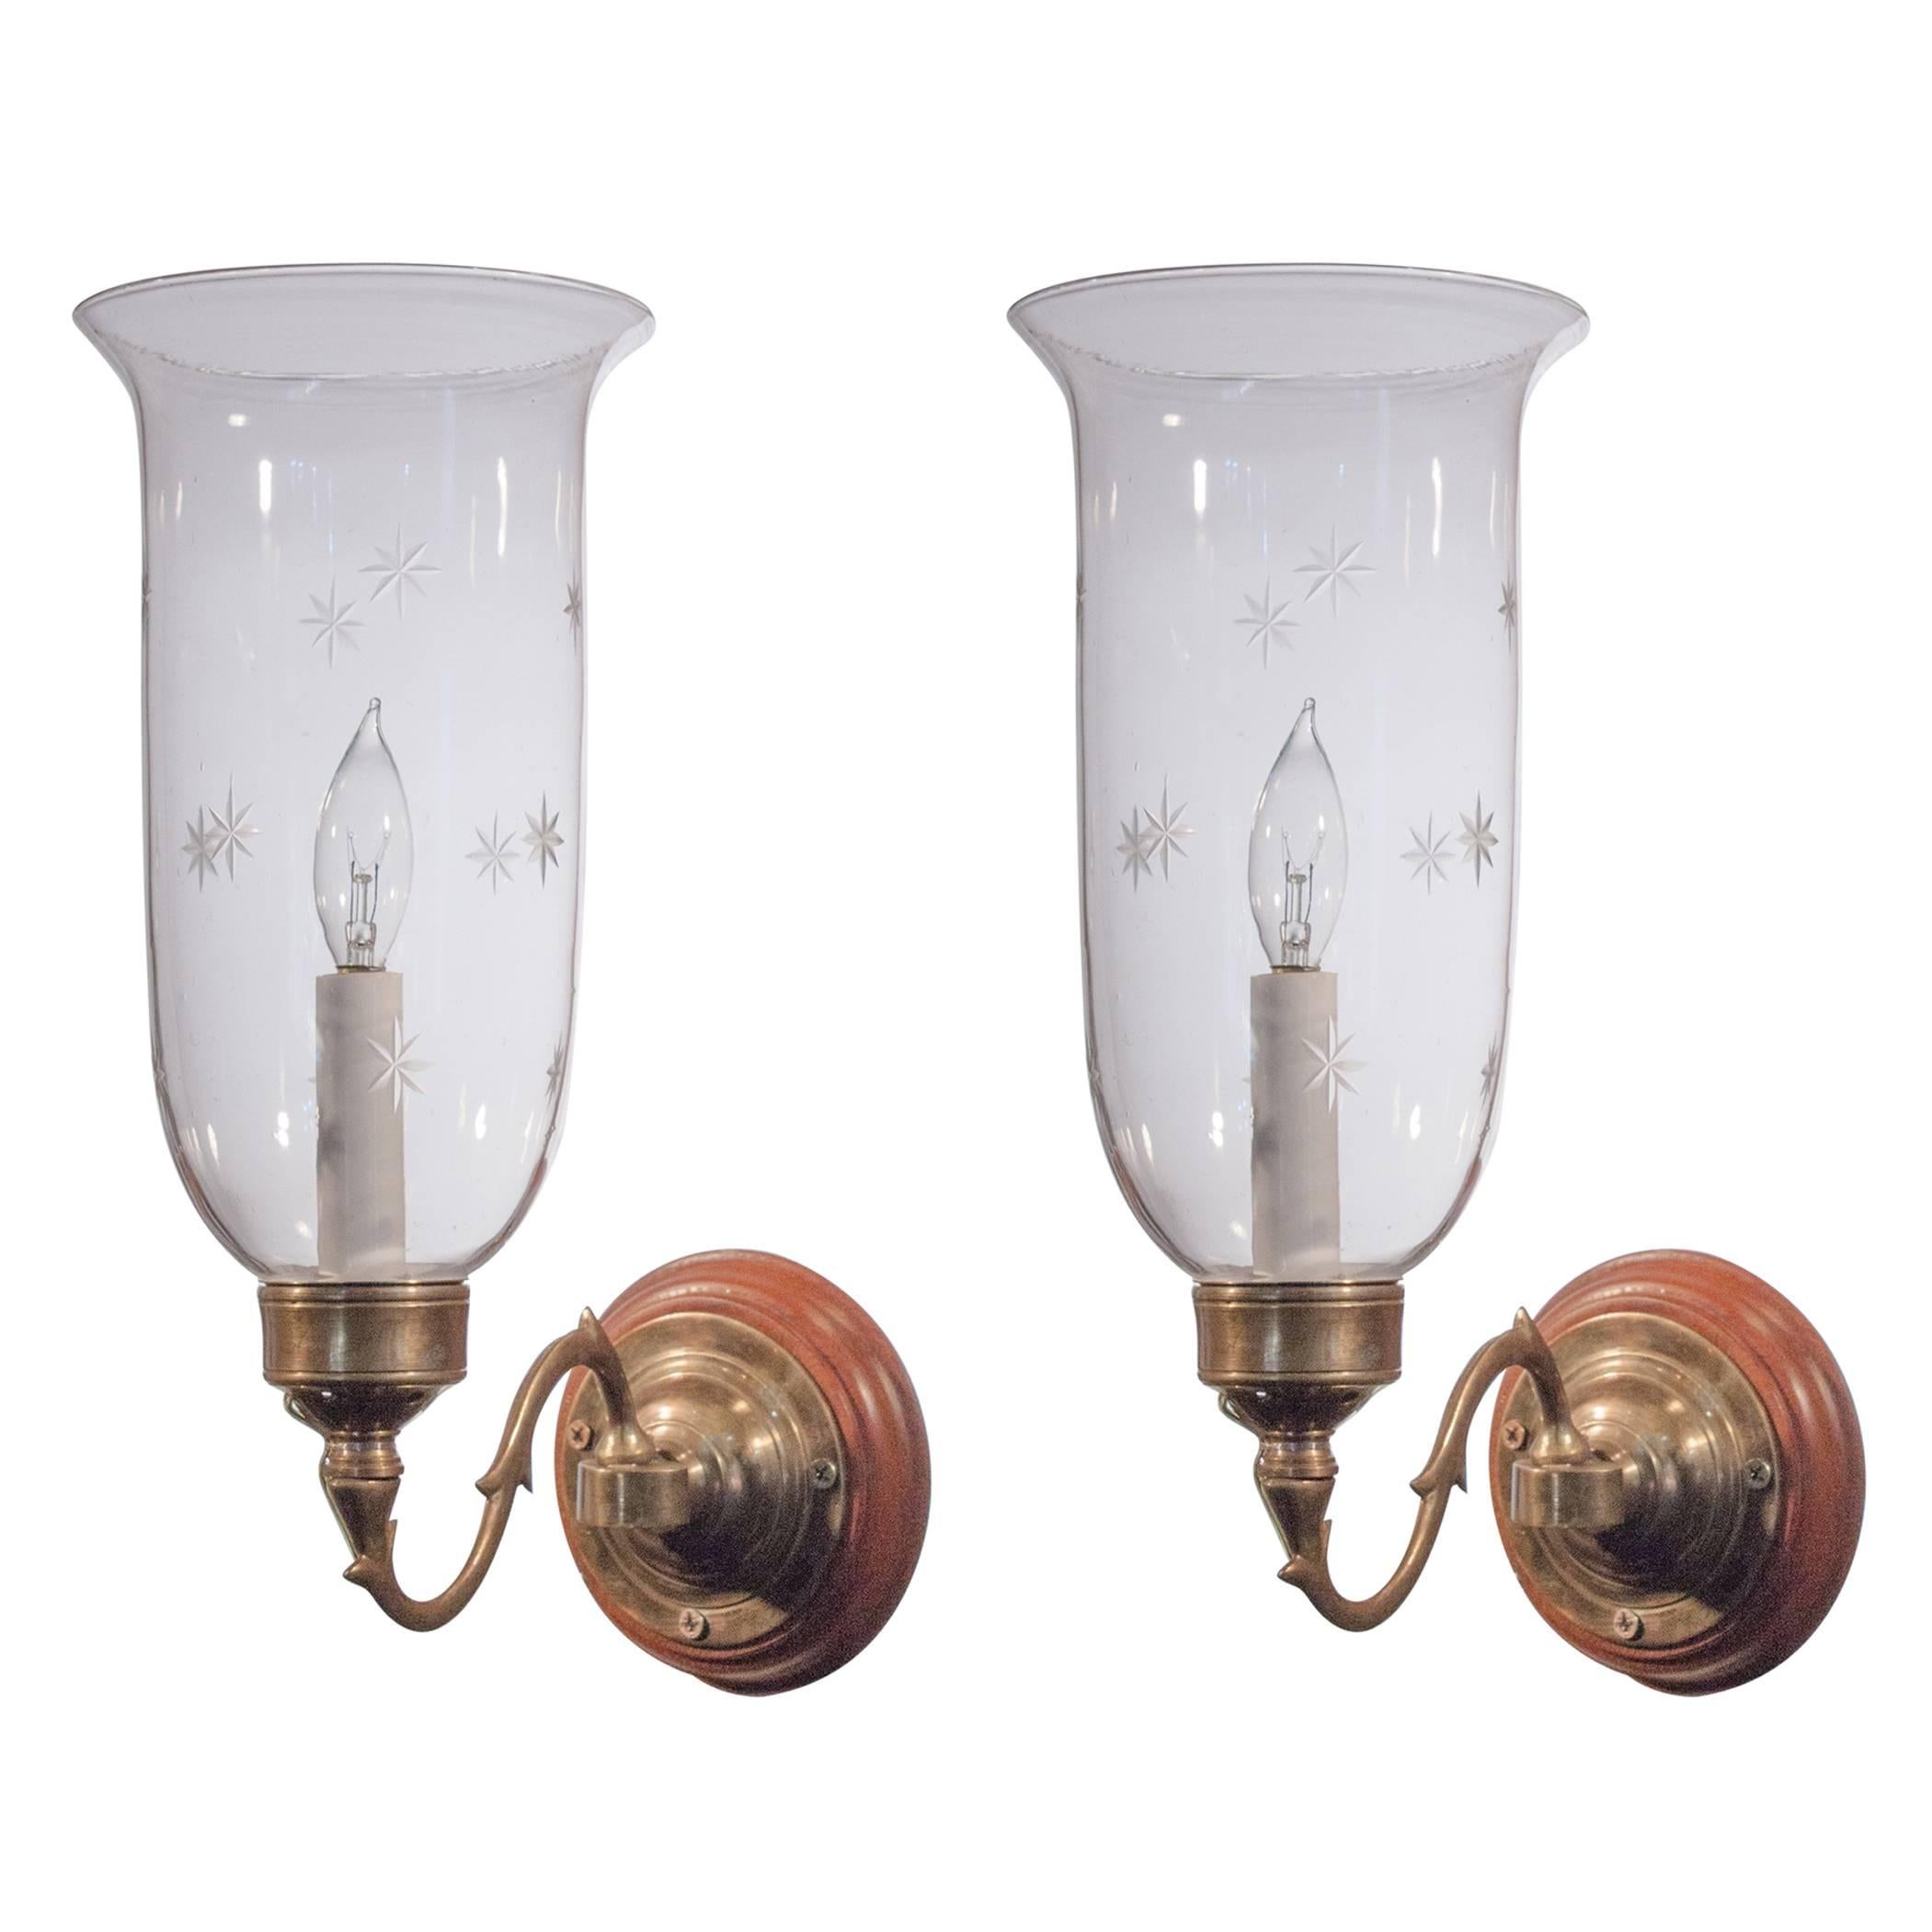 Pair of 19th Century English Hurricane Shade Sconces with Etched Stars